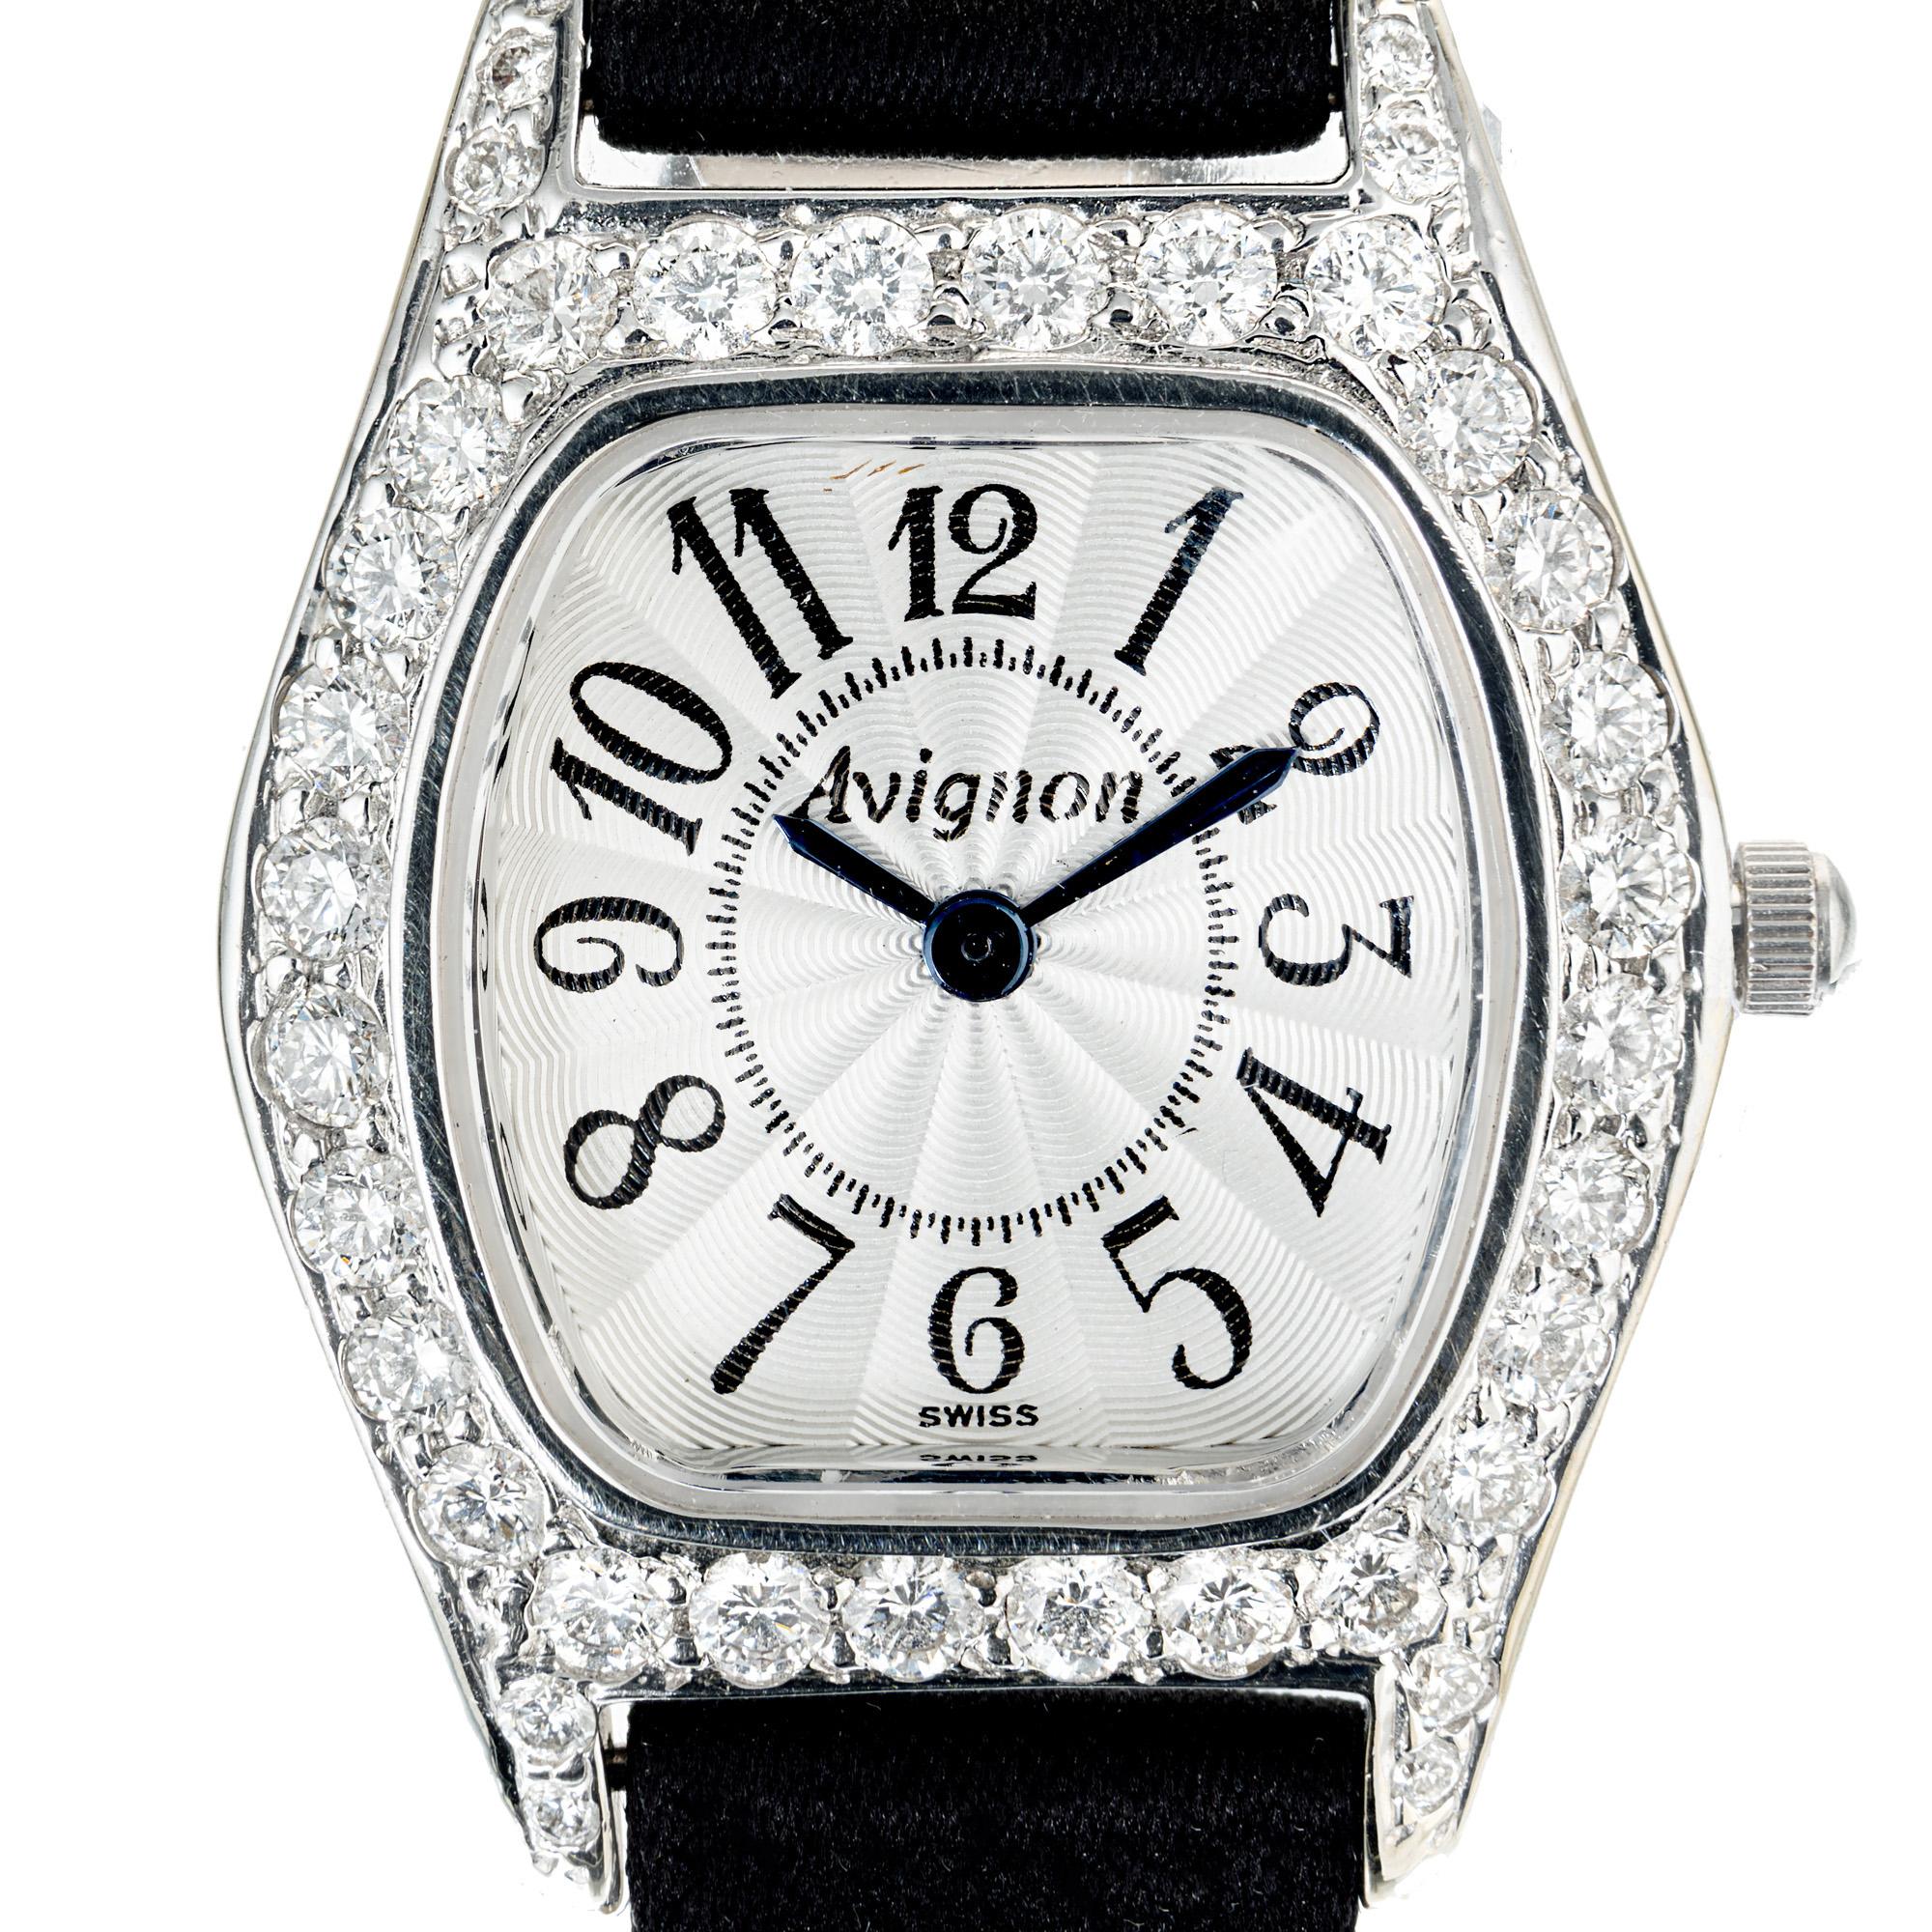 Ladies' Avignon 14k white gold watch. 40 round full cut diamond diamond bezel with a black satin strap.  

40 round full cut diamonds, 1.65ct, F color, VS clarity. 
14k White Gold
Tip: 32.68mm
Width without crown: 24mm
Width with crown: 26.34mm
Band